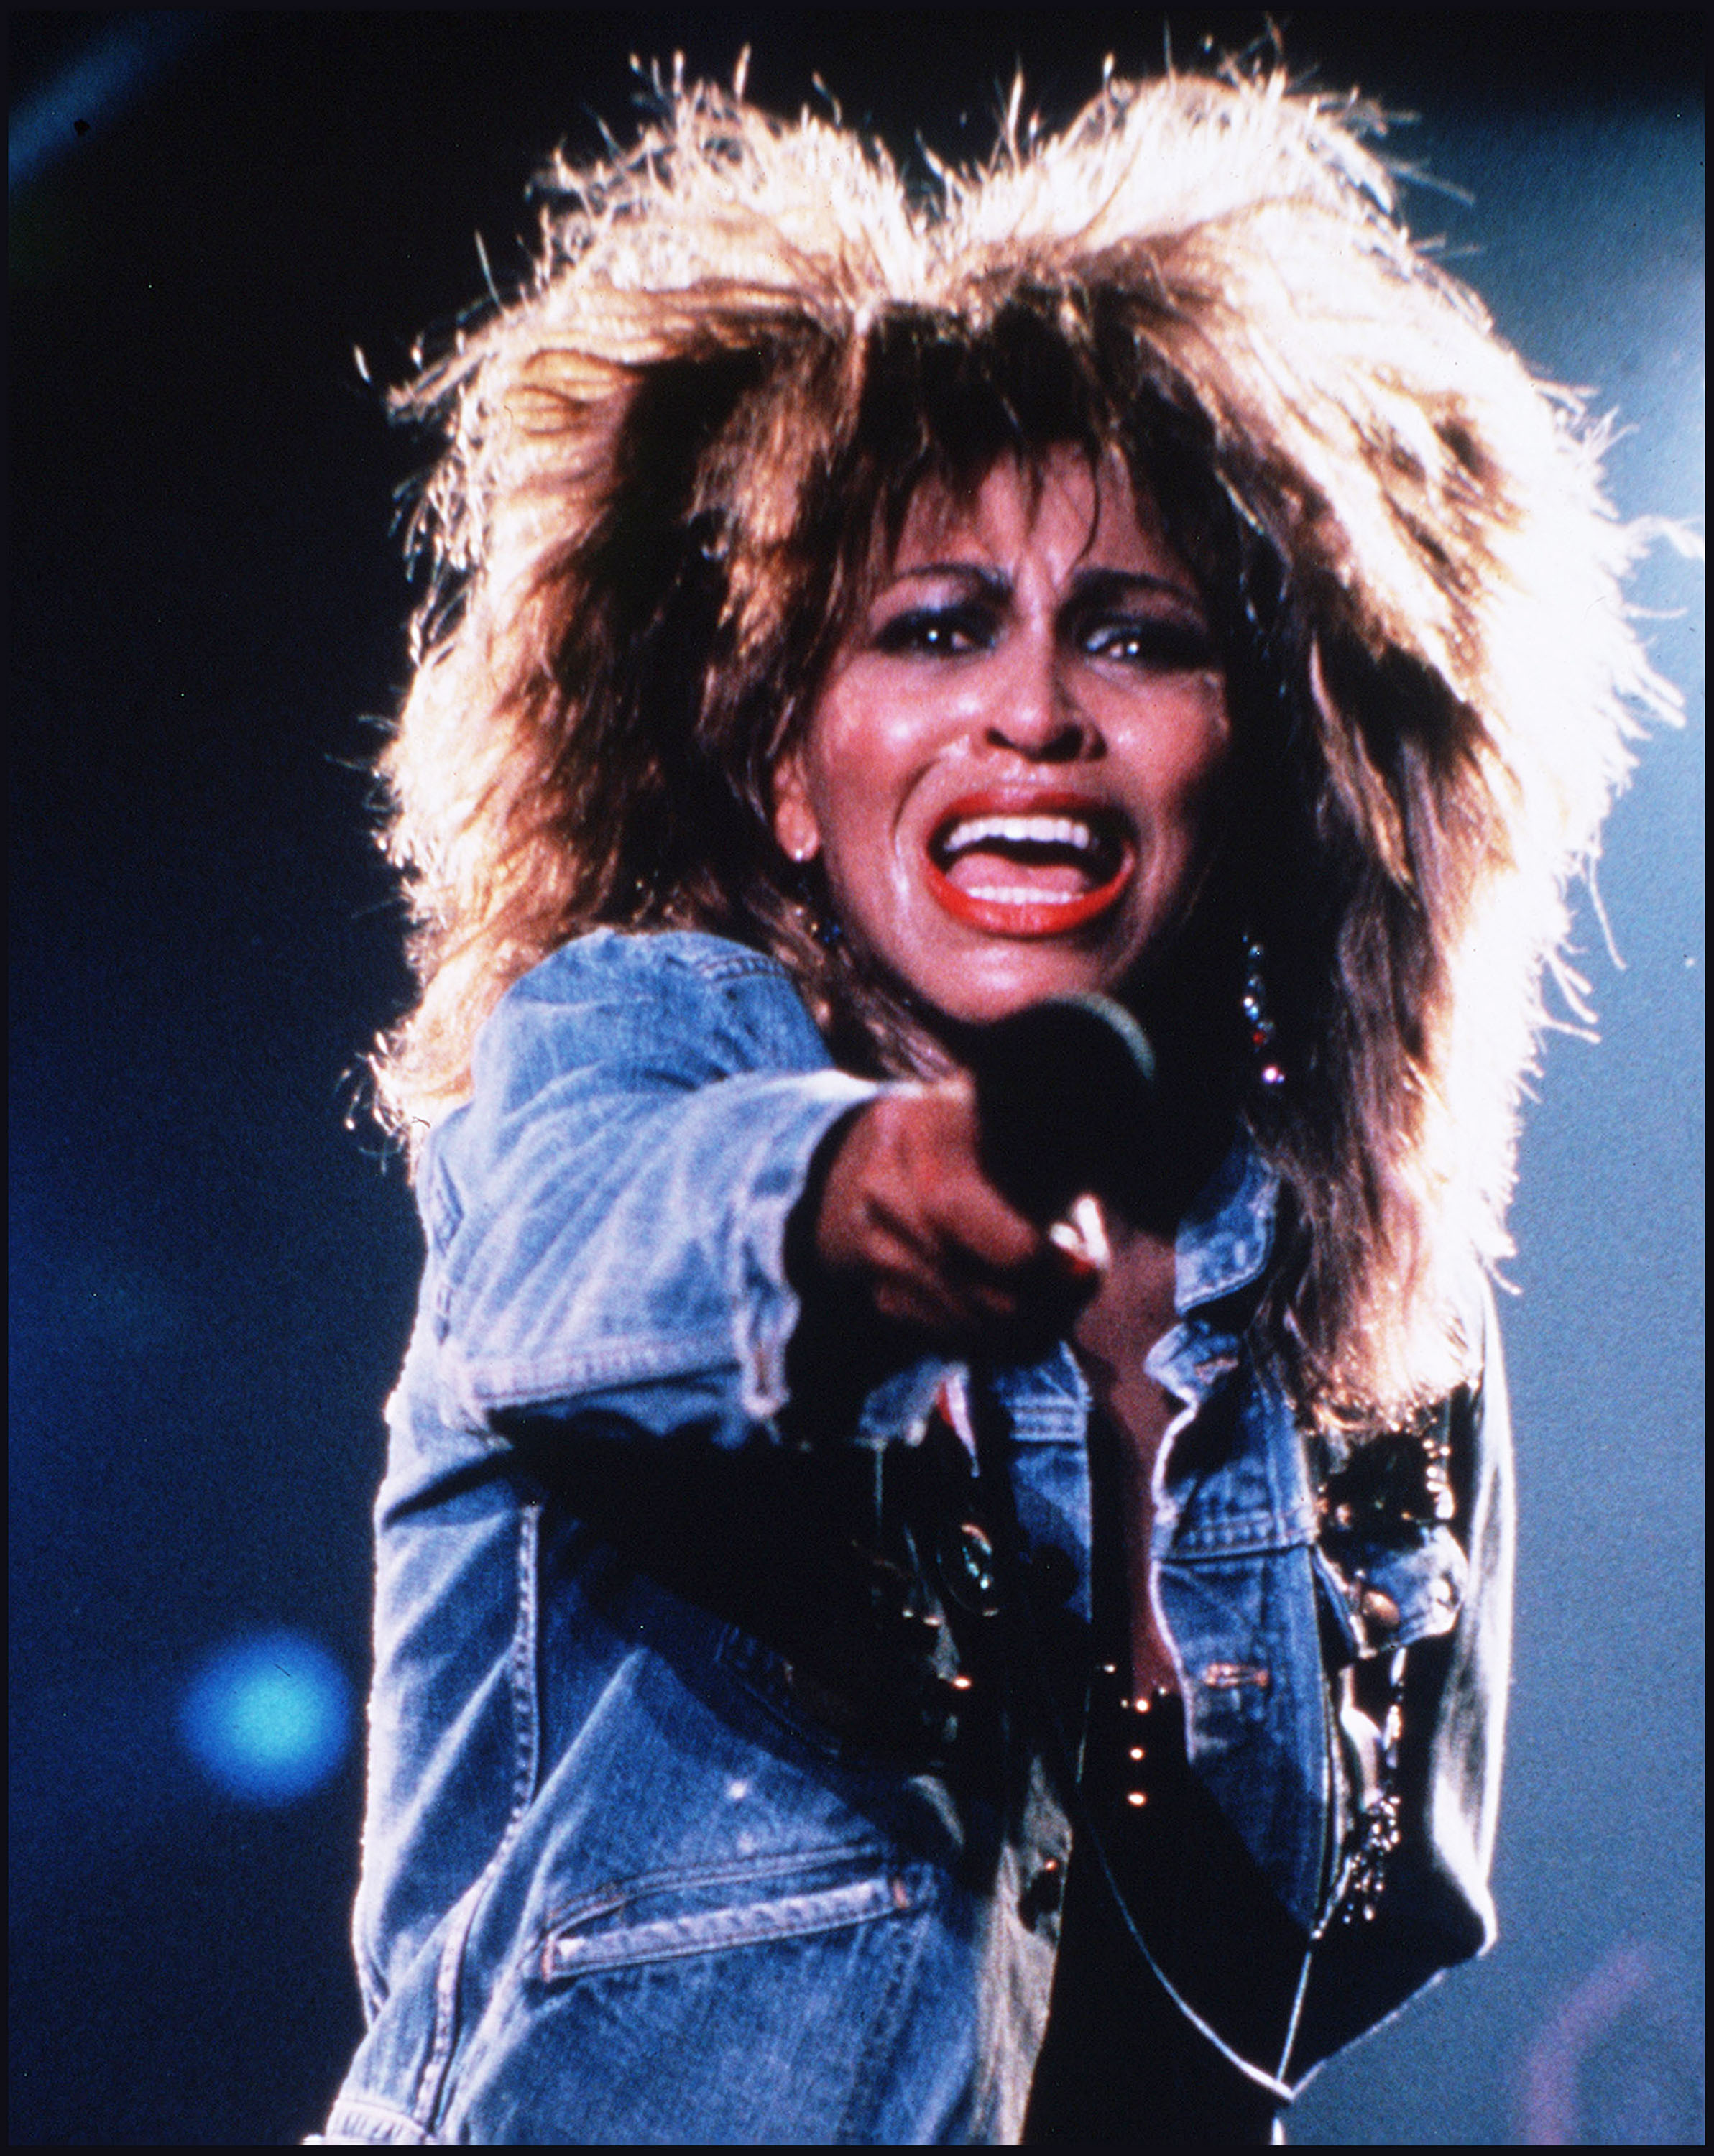 Tina Turner at Wembley Stadium in 1990. | Source: Getty Images